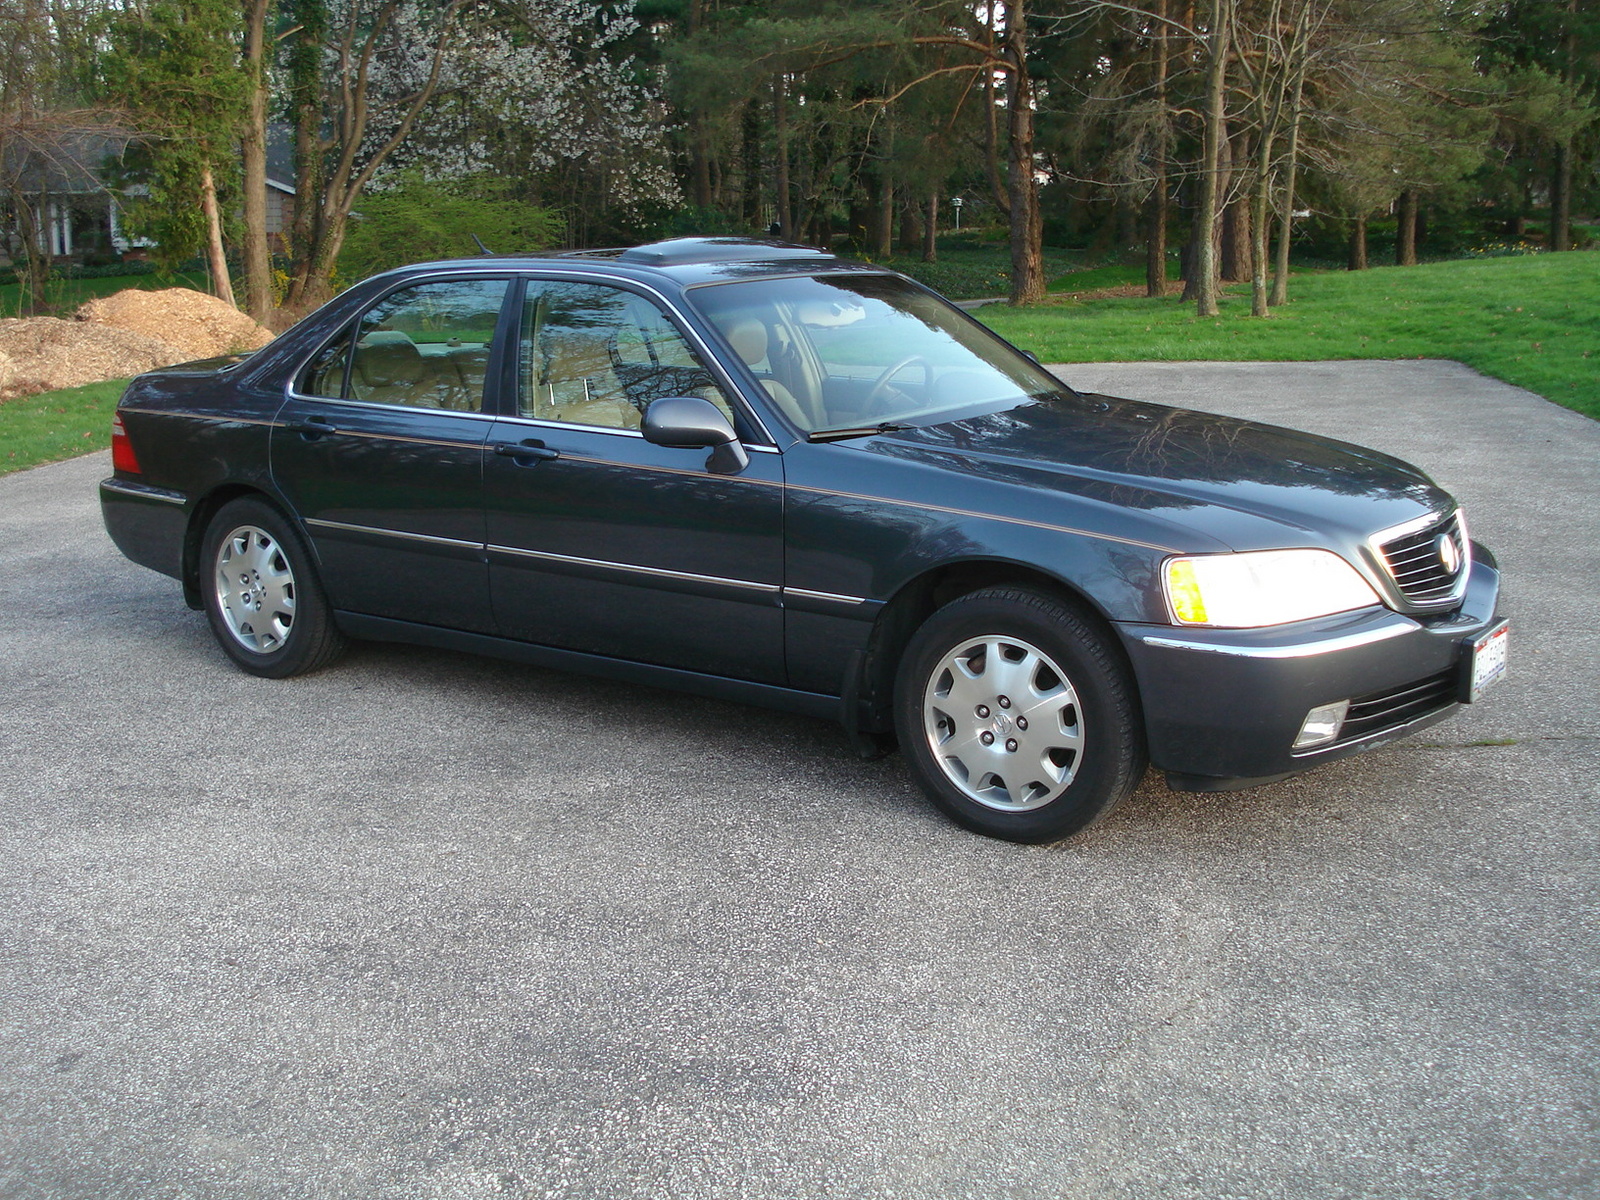 2003 Acura RL - Information and photos - Neo Drive